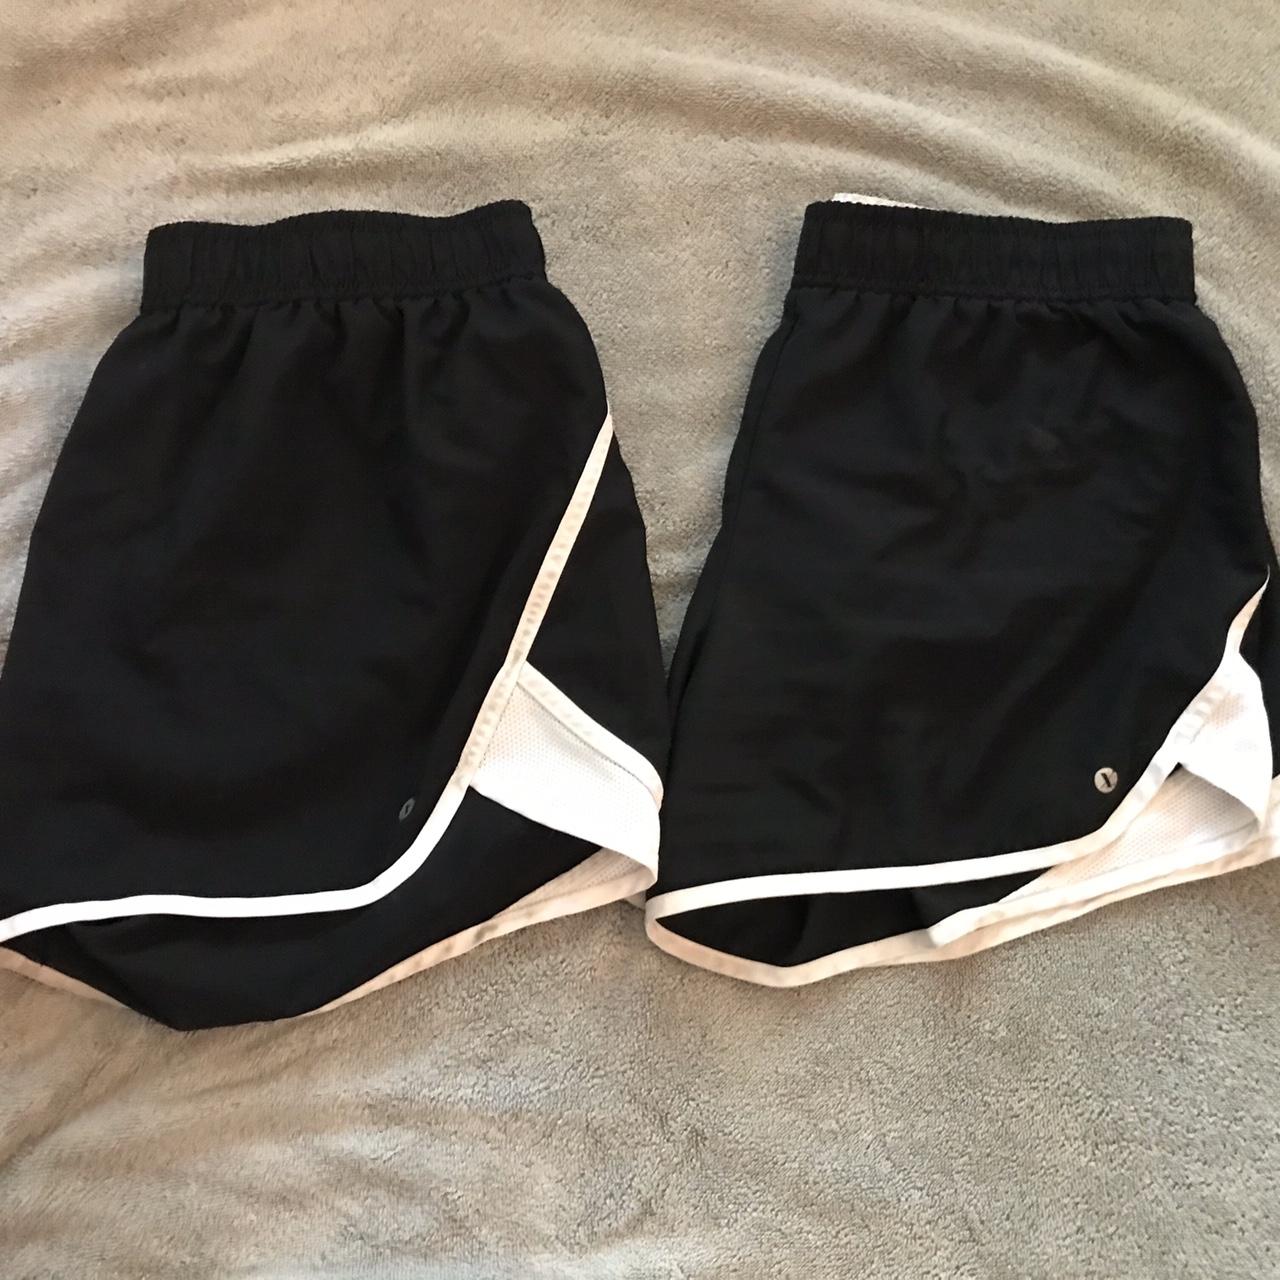 JCPenney Women's Black and White Shorts | Depop